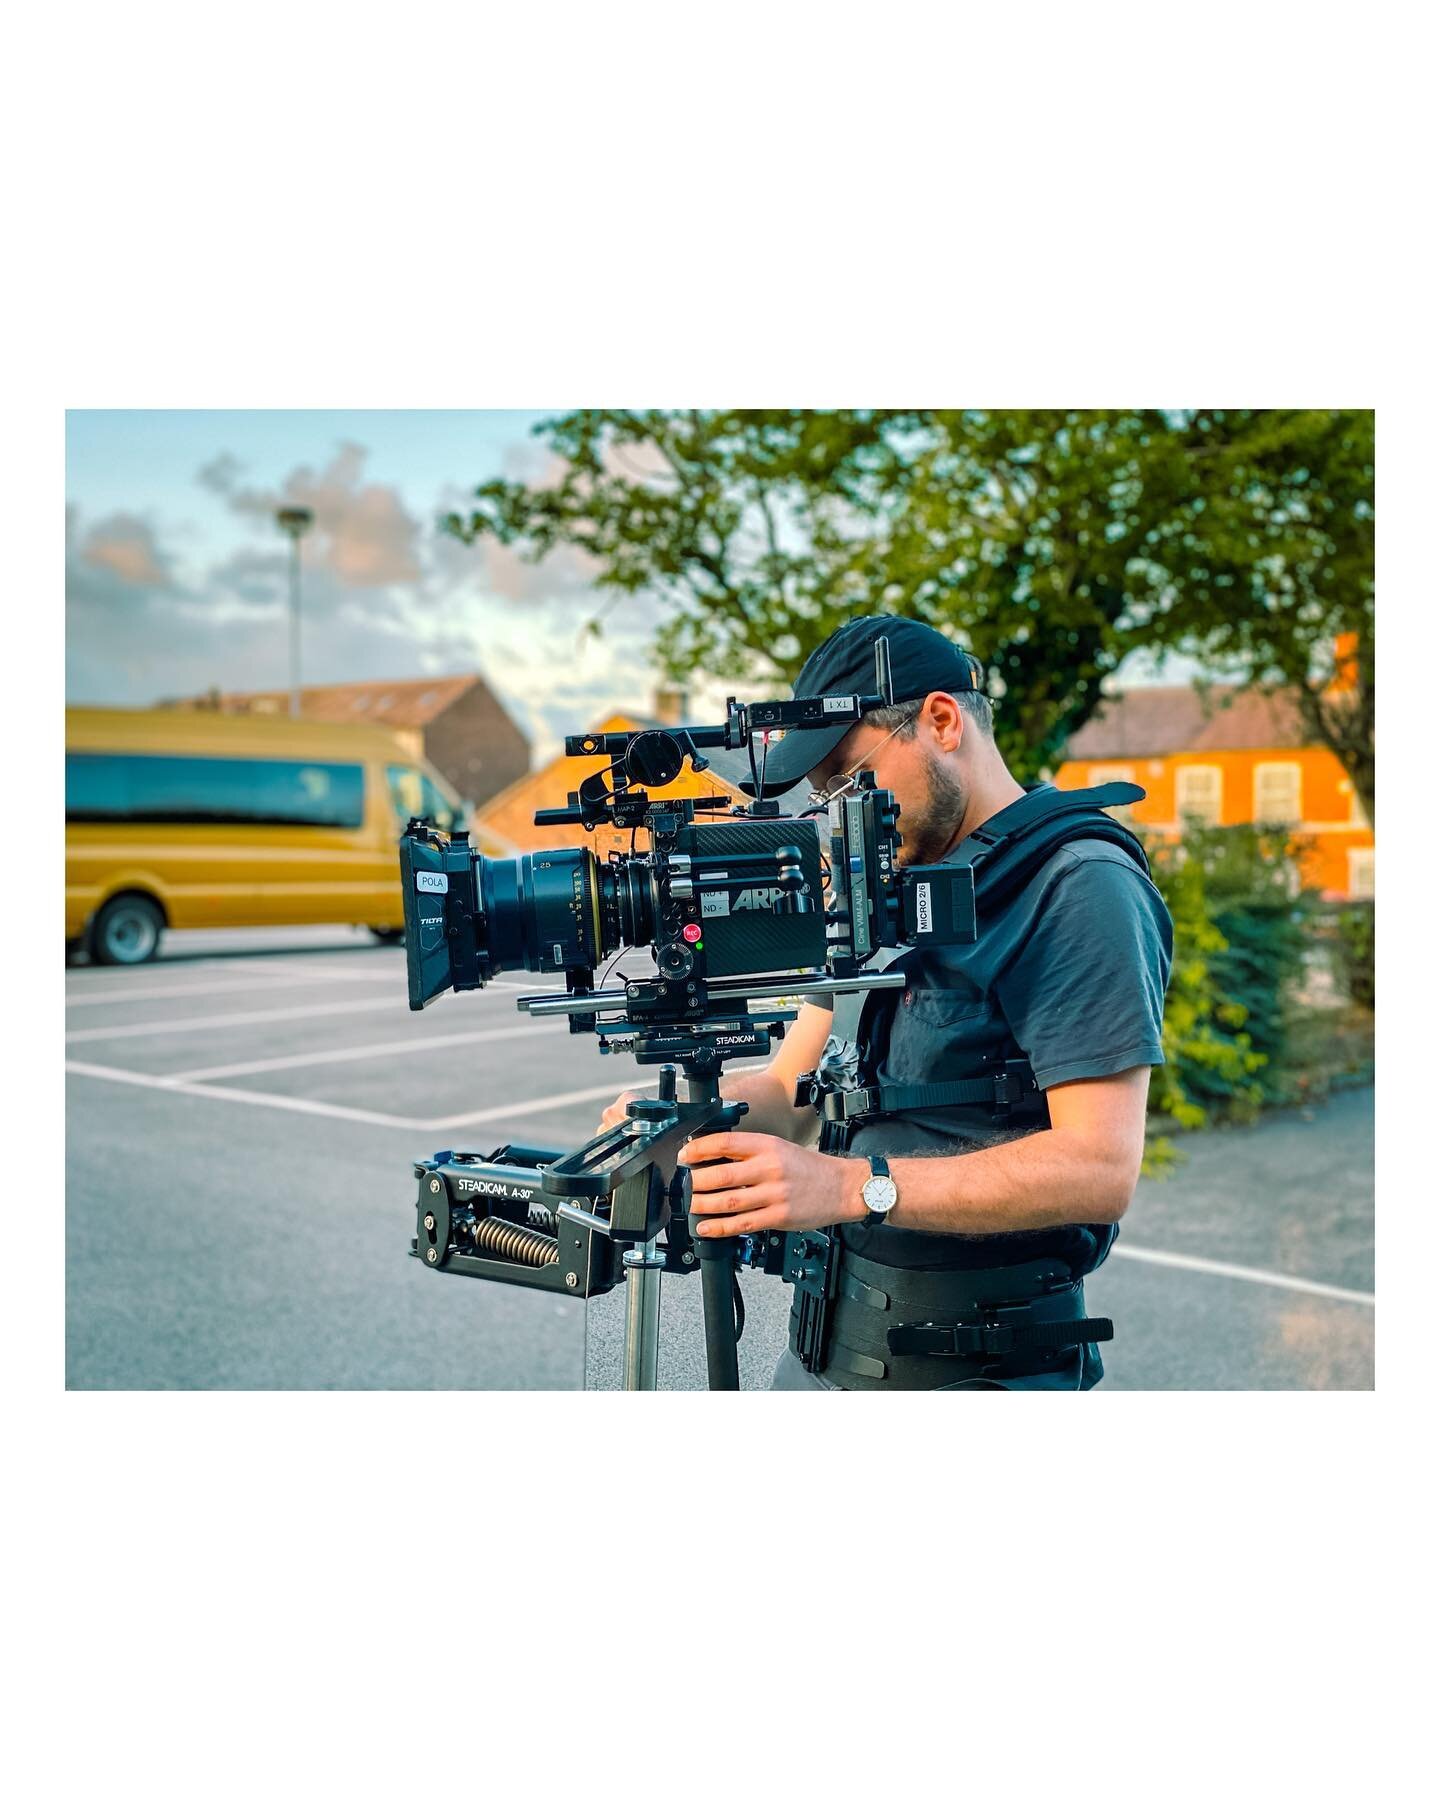 Little bit of BTS from &lsquo;Say Something&rsquo; - @cmatbaby with @georgehaydockdop on the Steadi. 

Pulling on Alexa Mini + TLS Super Baltars from @pixipixeluk